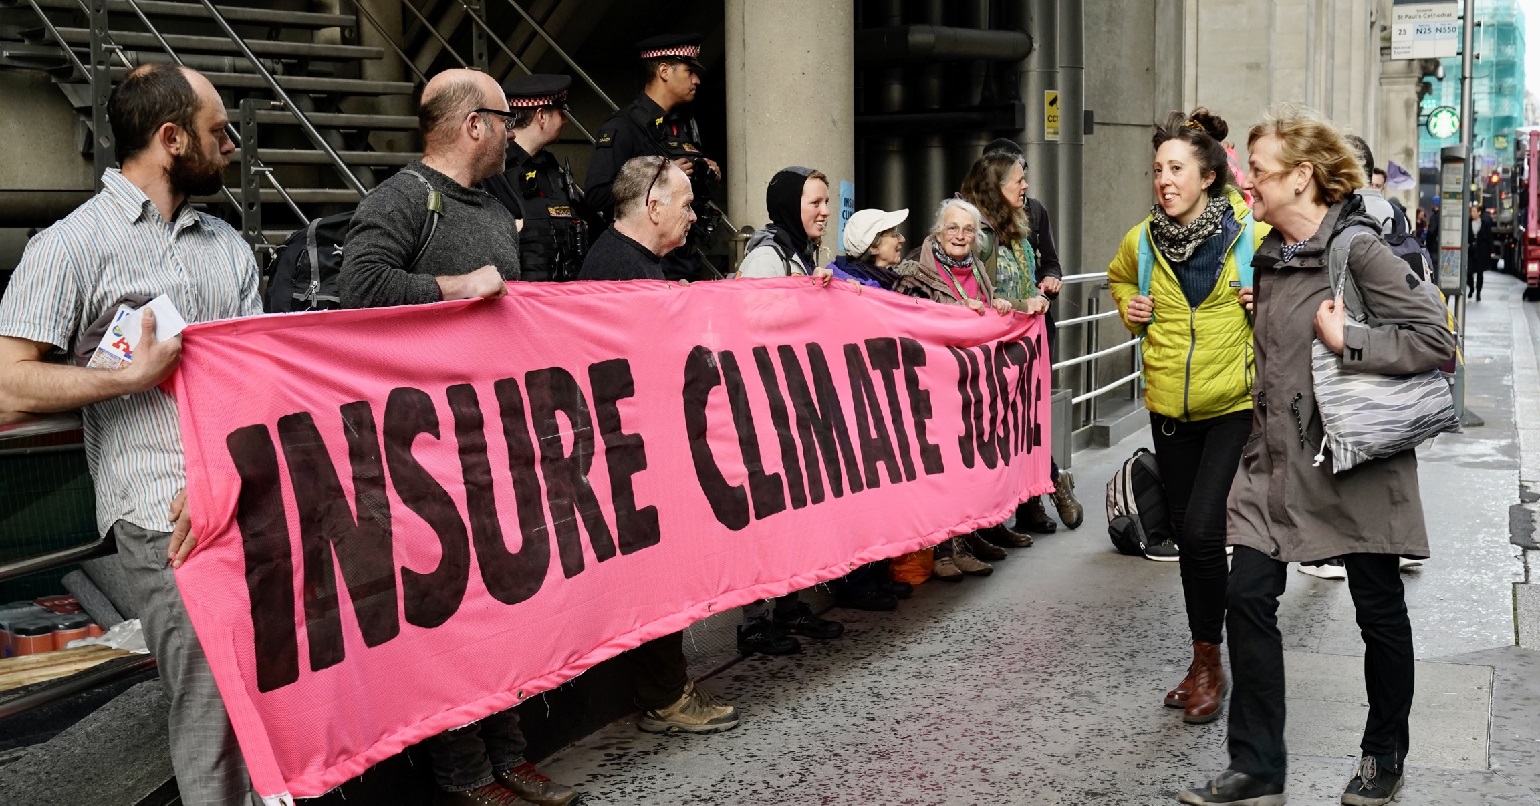 A photo of the Extinction Rebellion blockade of Lloyds of London HQ with activists holding a banner reading "insure climate justice"